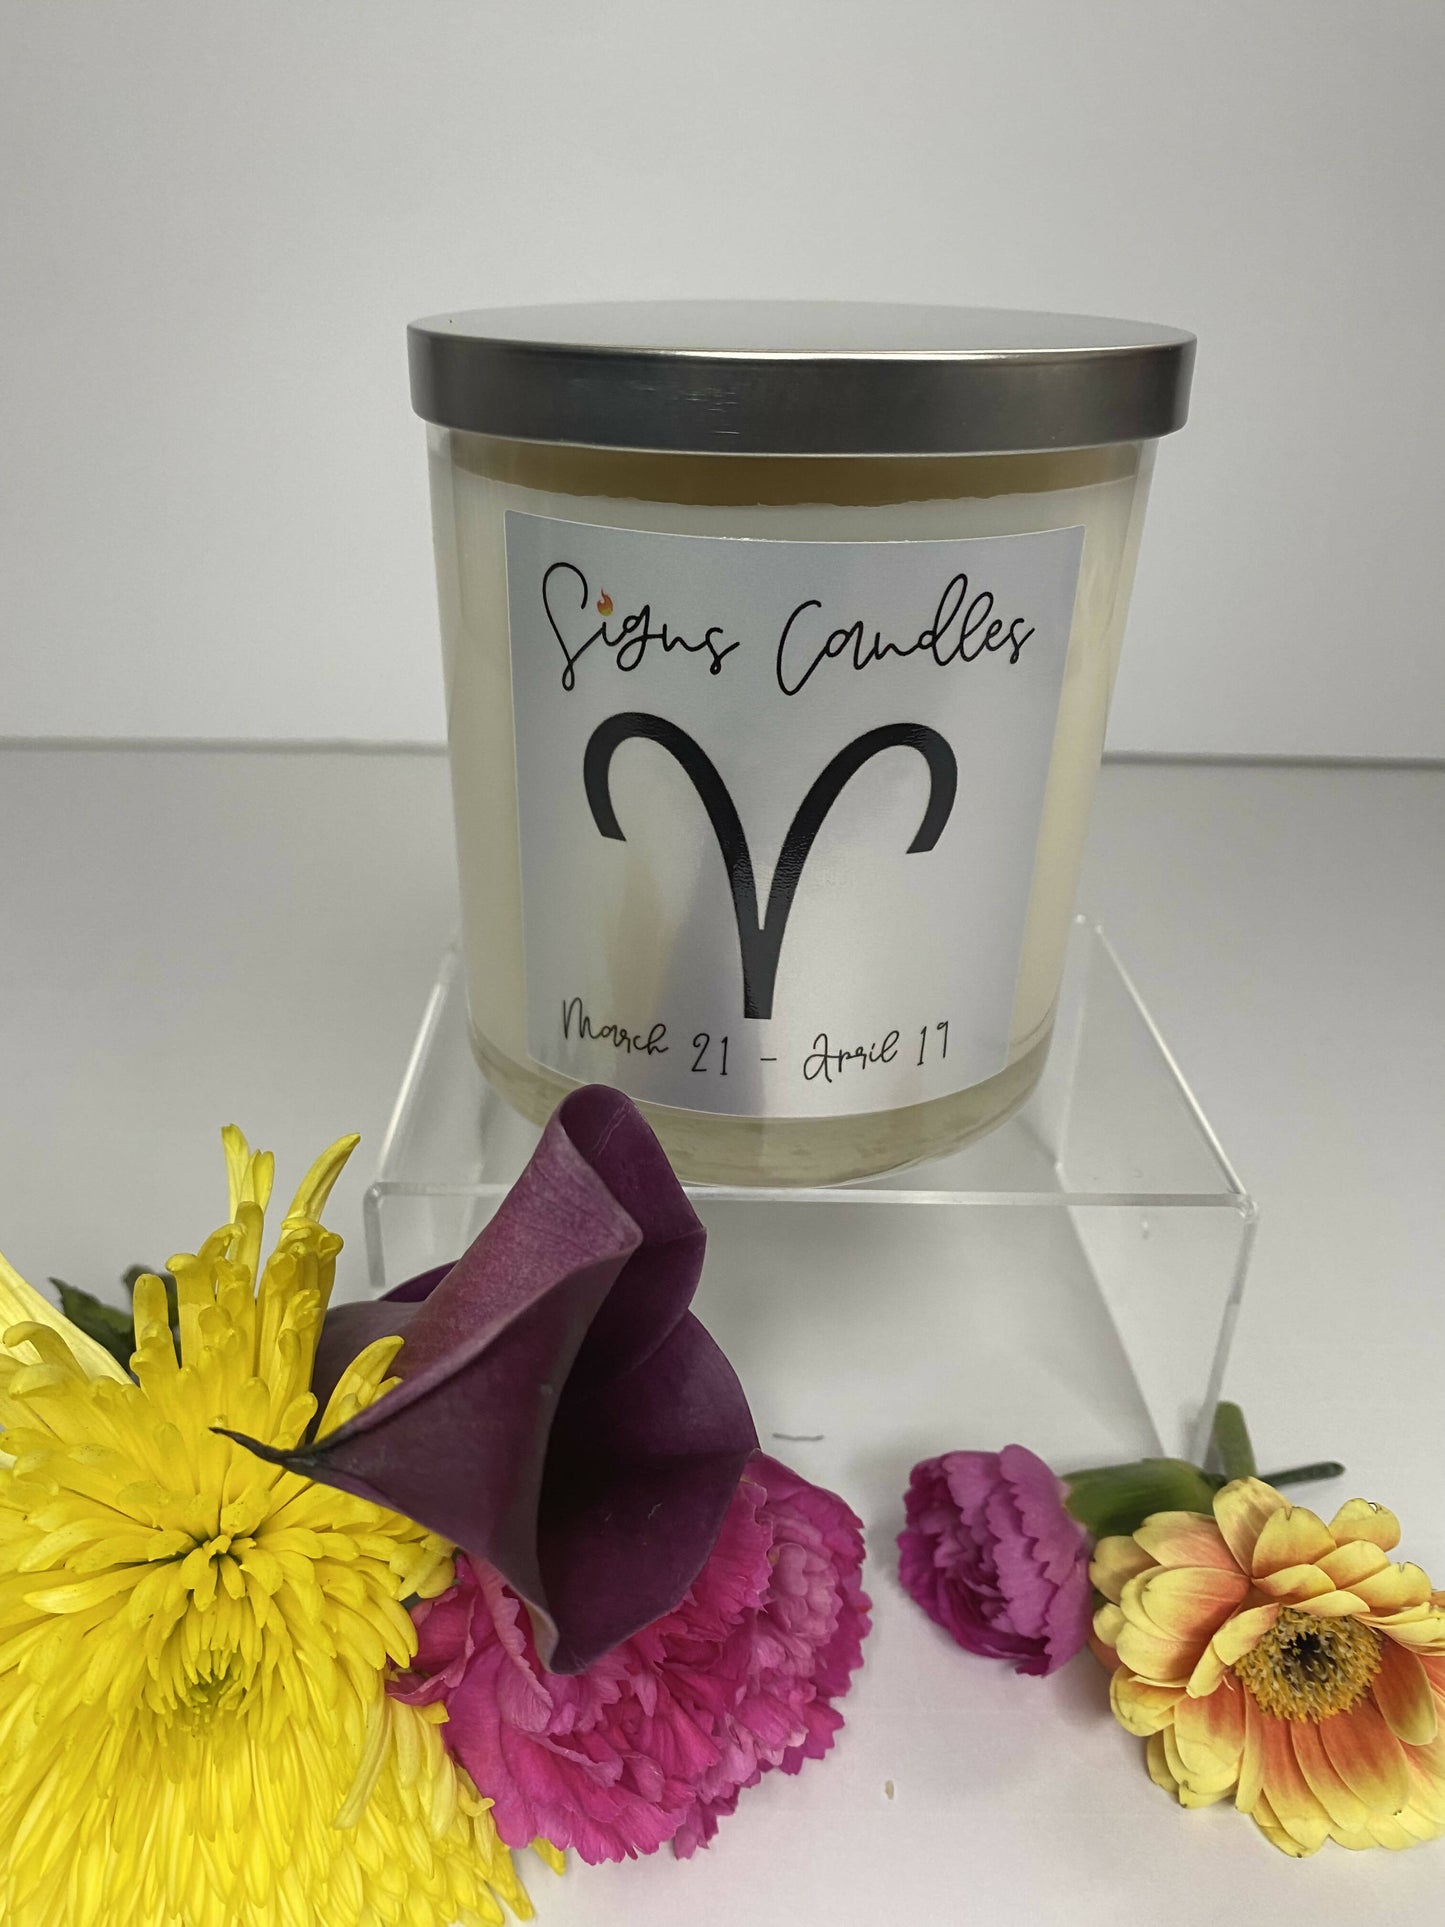 Aries Zodiac Sign Candles